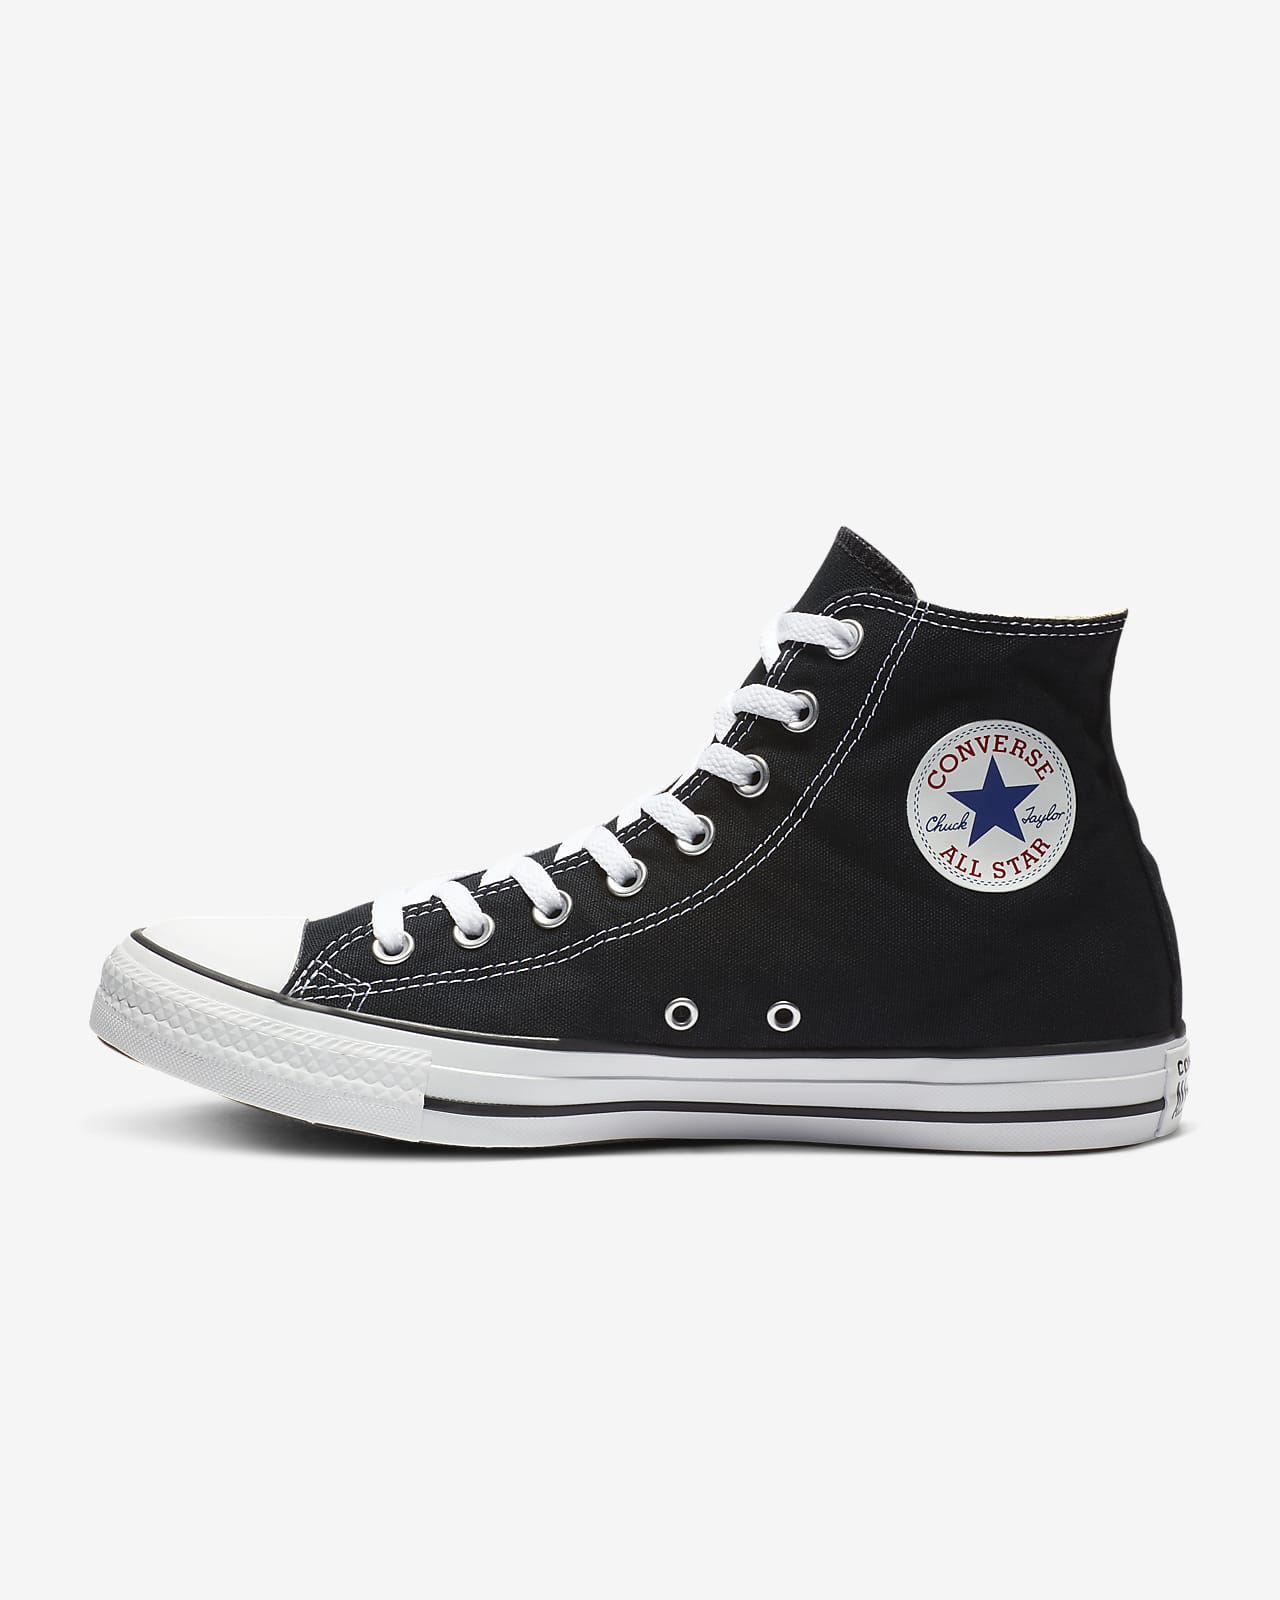 Converse Chuck Taylor All Star High Top Shoes دايس